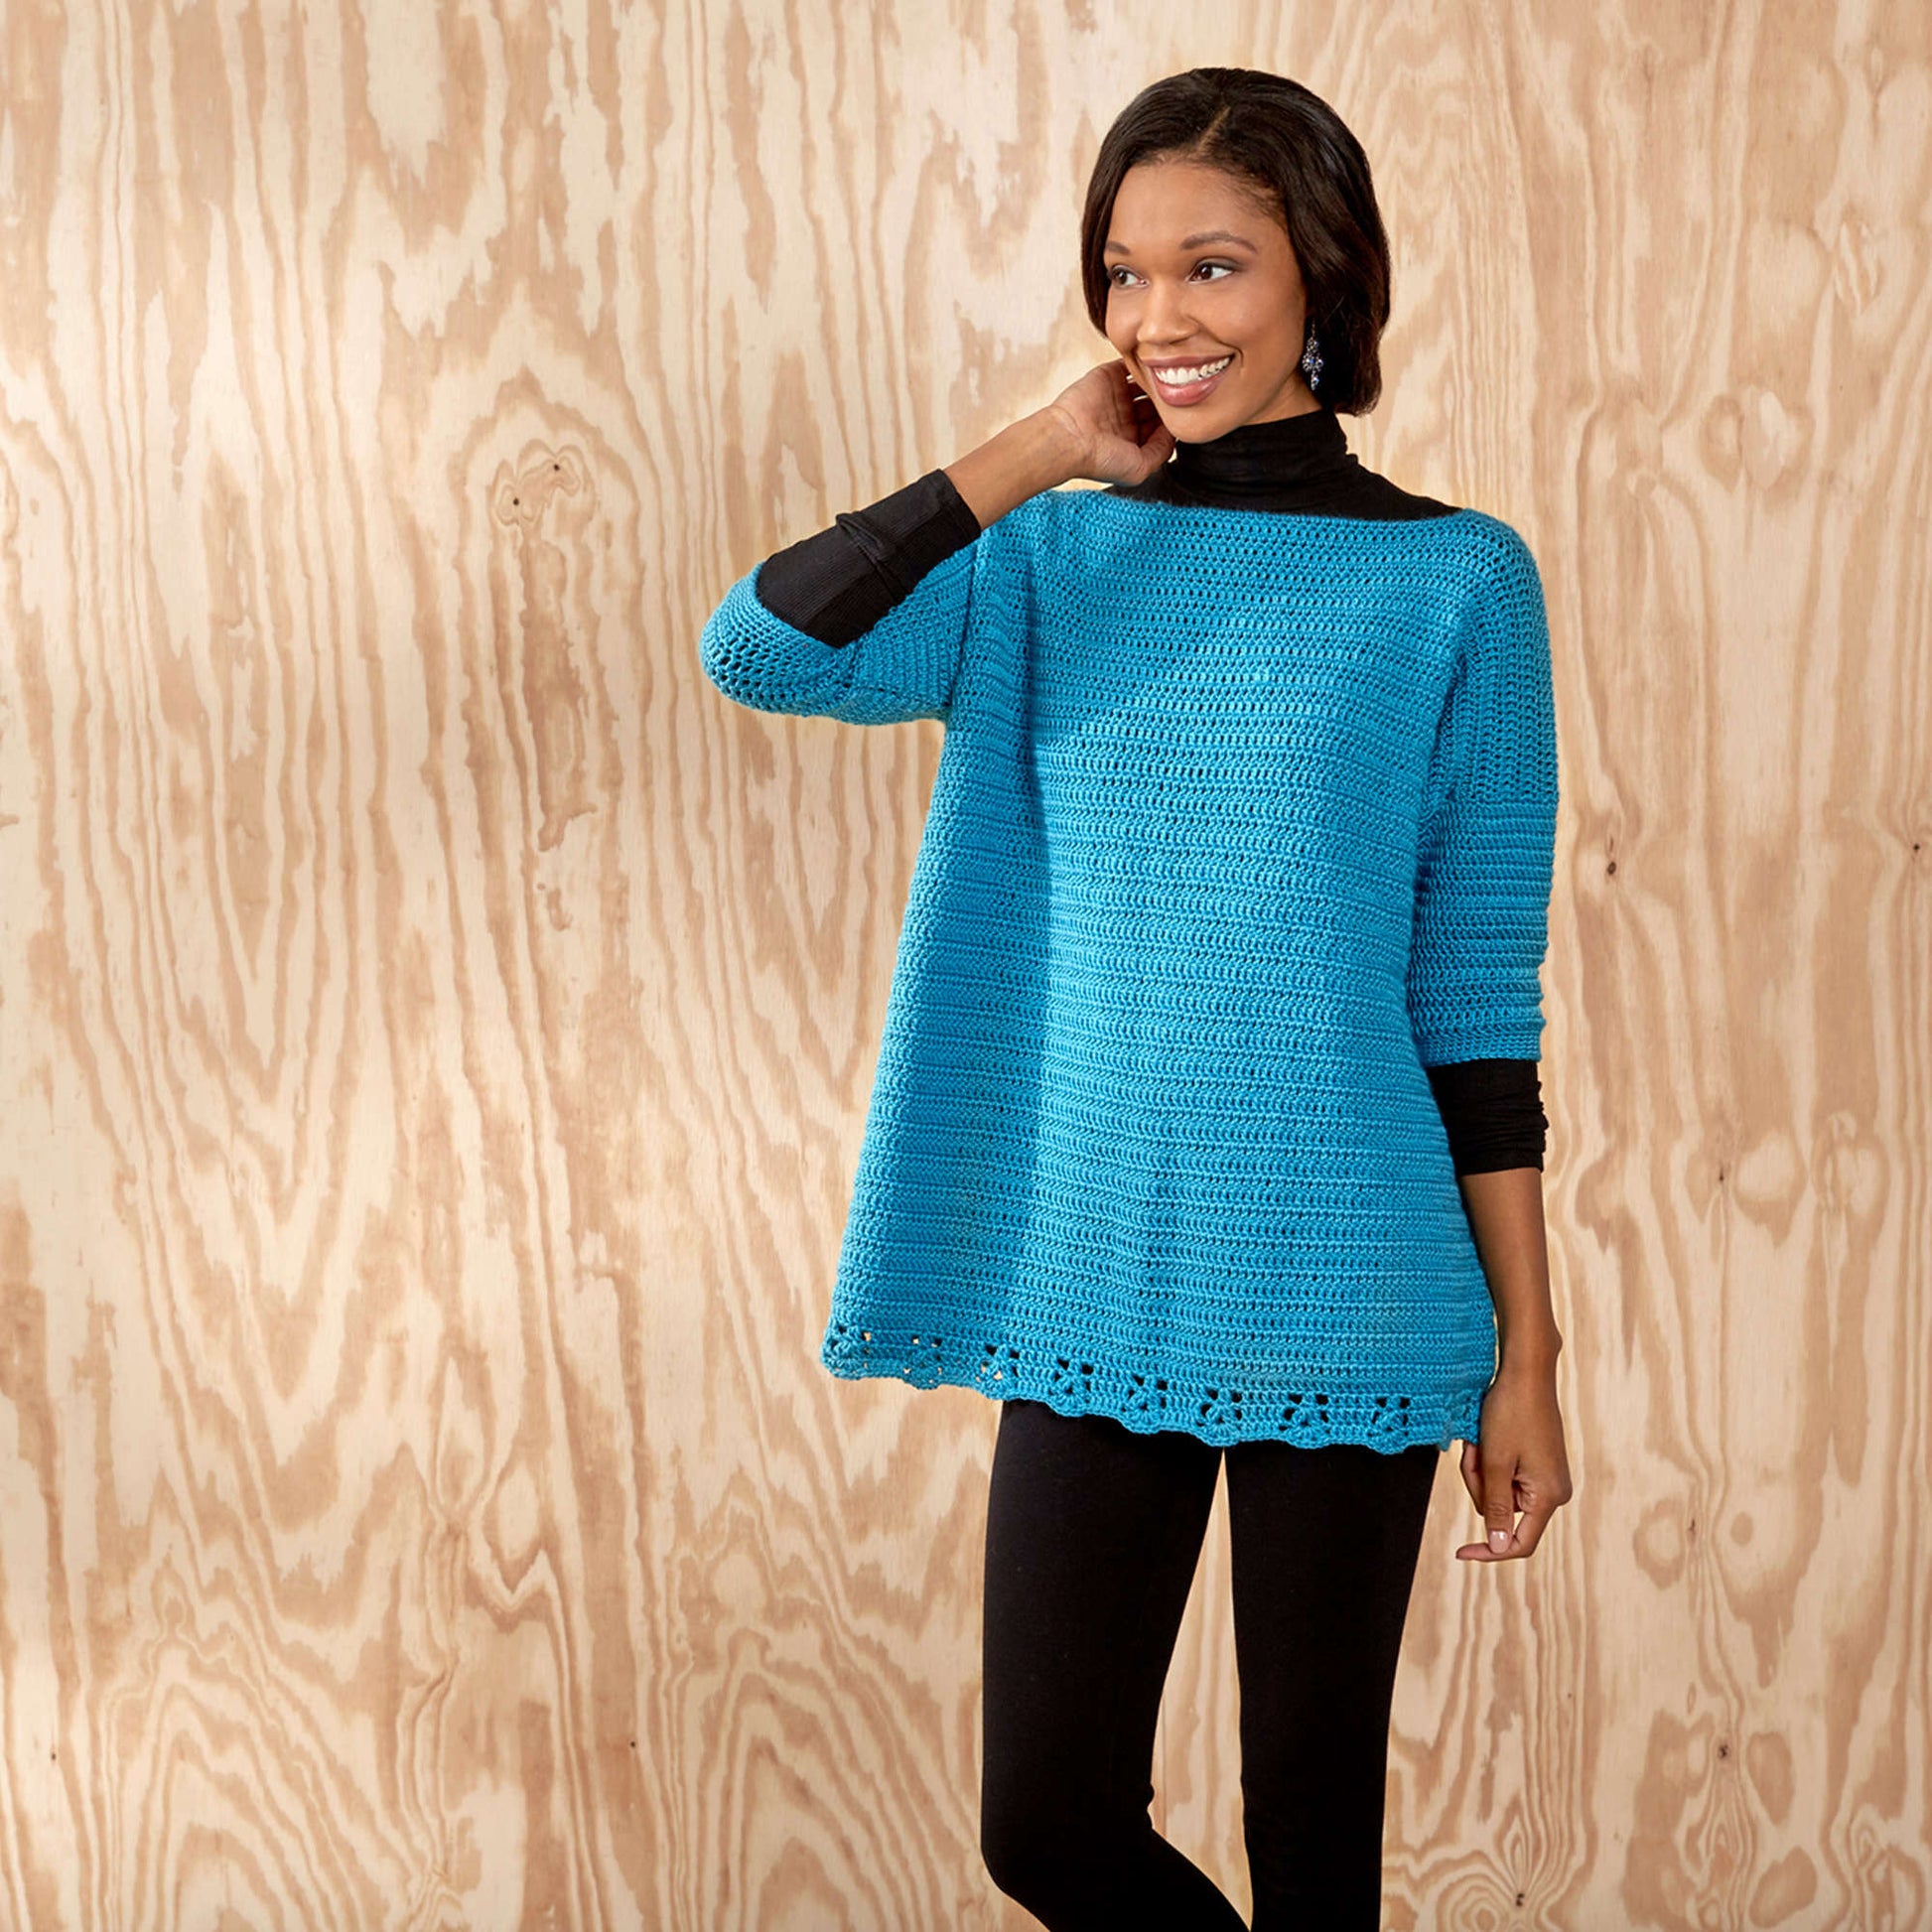 Free Red Heart Crochet Relax-and-Unwind Sweater Pattern